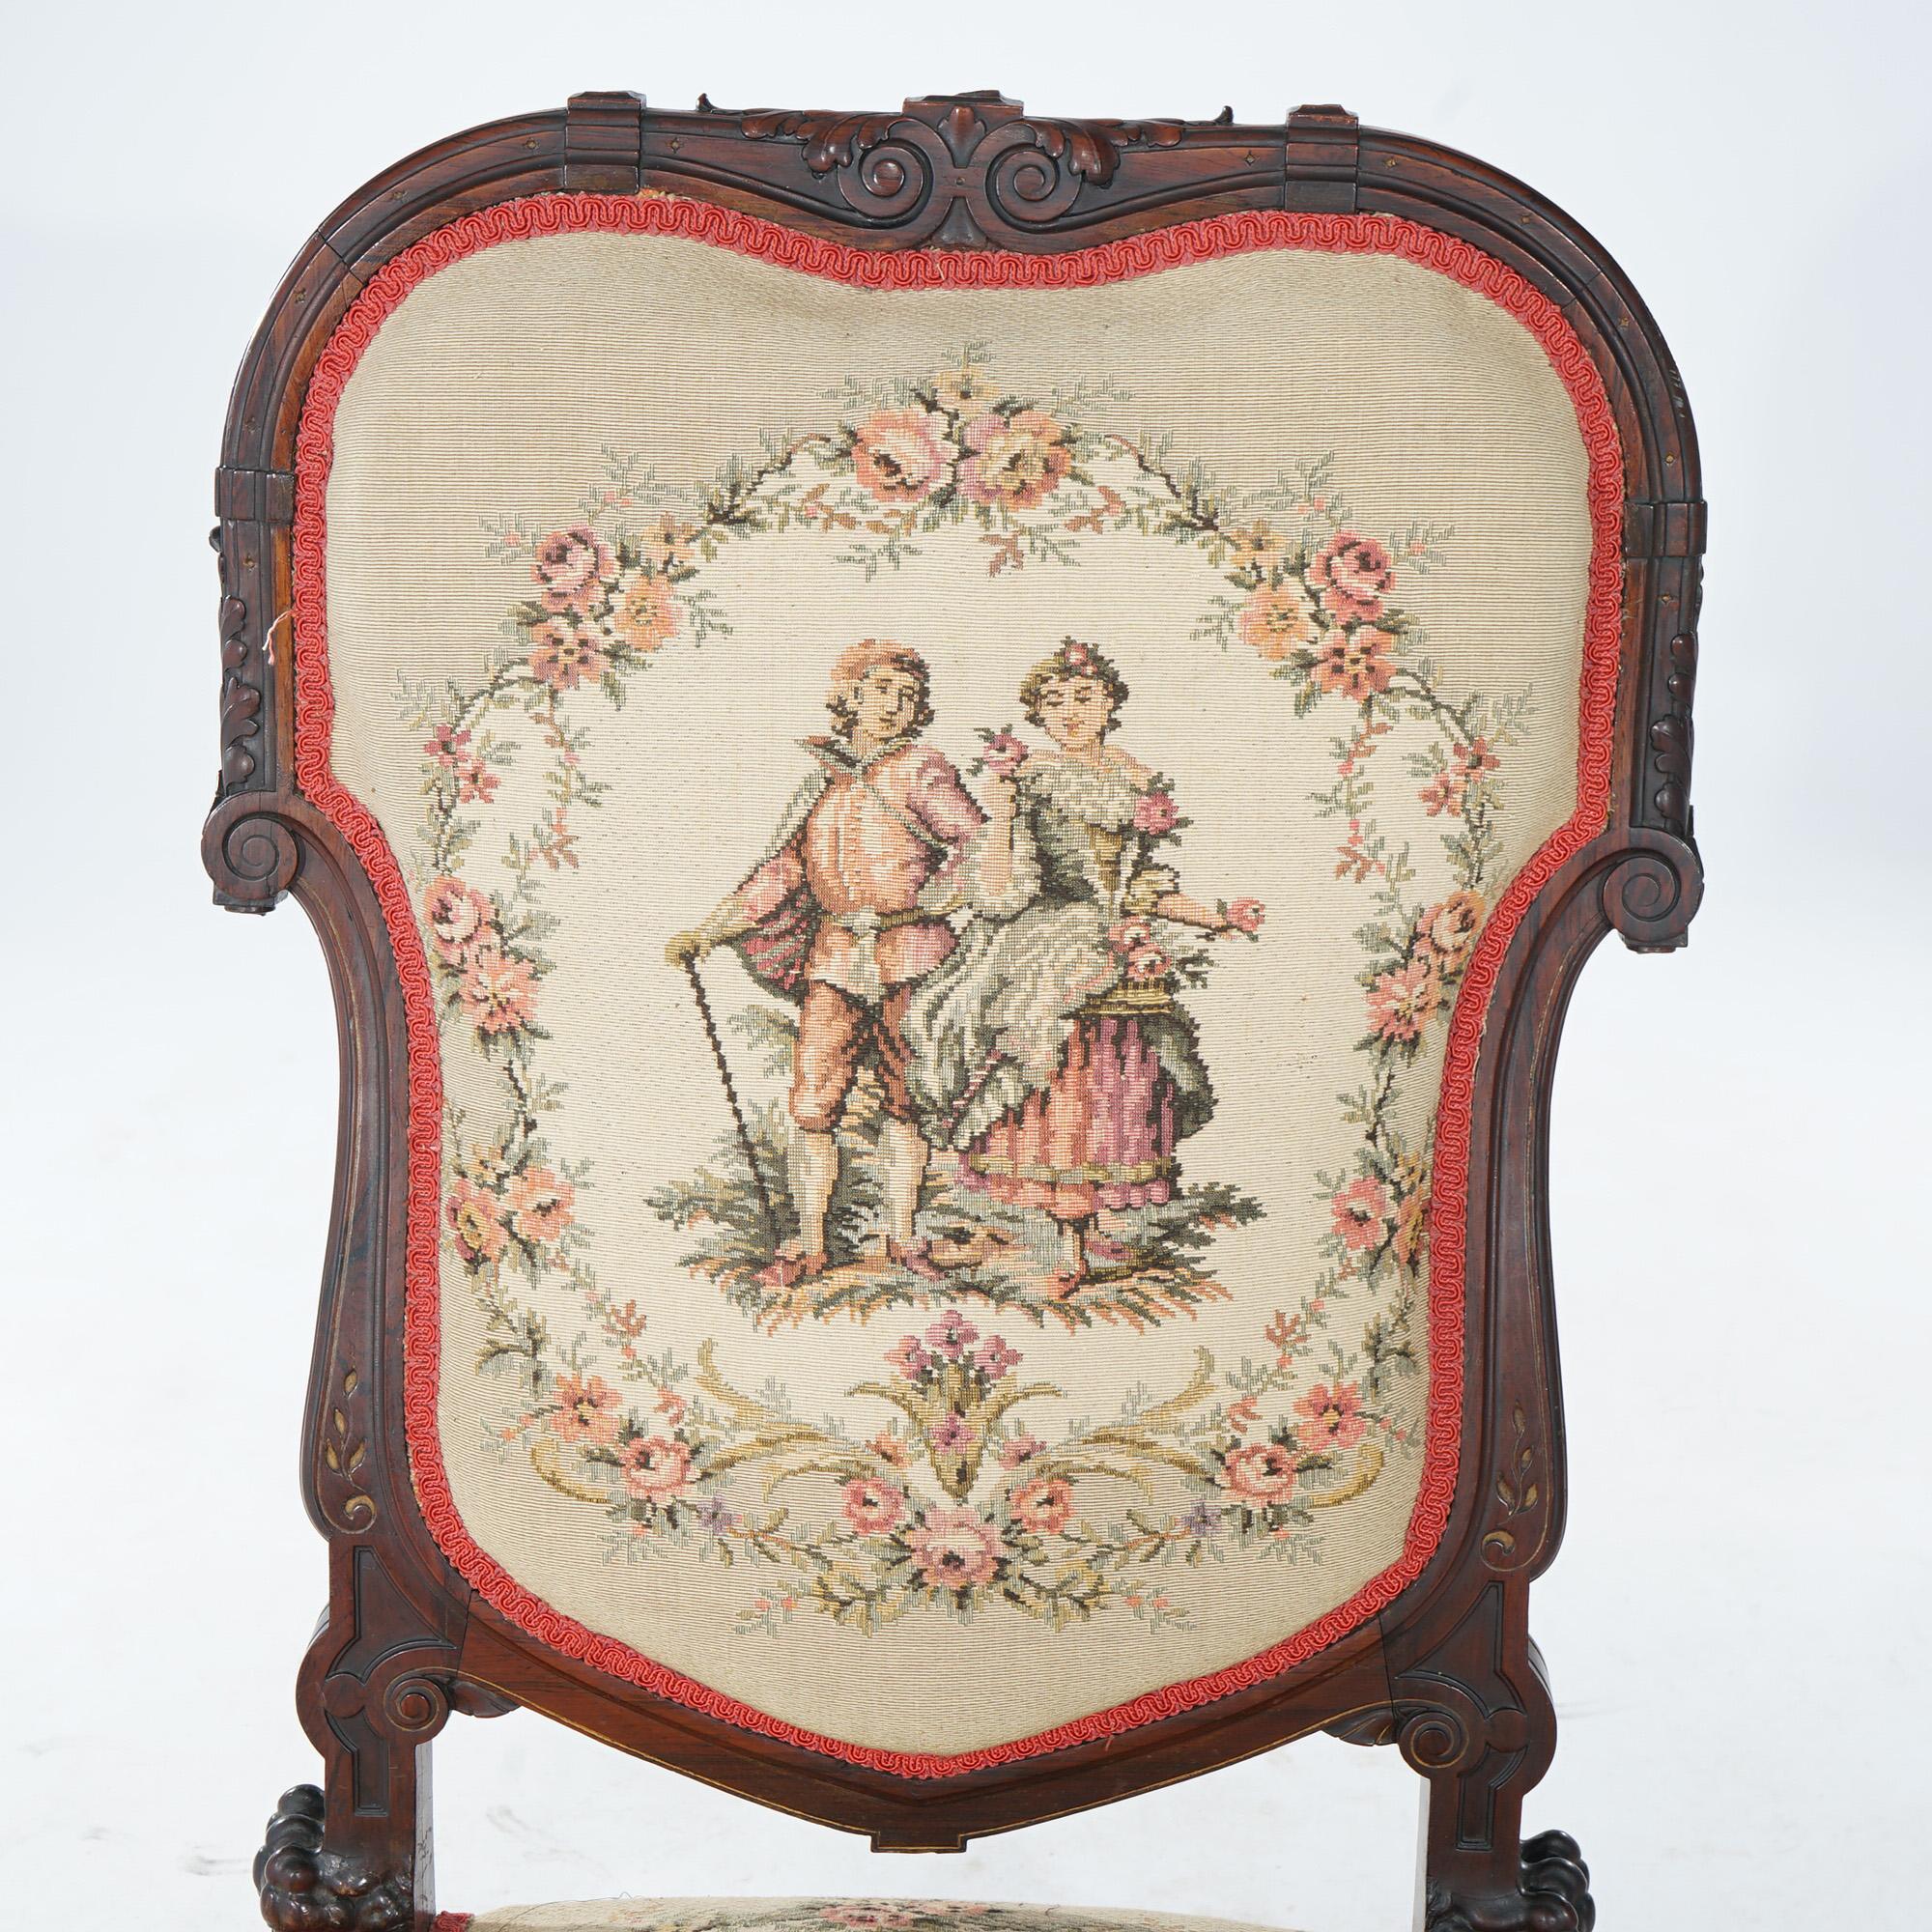 An antique Victorian slipper chair offers rosewood construction with gilt incised decoration and upholstered in tapestry with courting scene, 19th century
Rosewood & Gilt Incised Tapestry Slipper Chair, 19th century

Measures - 27.75